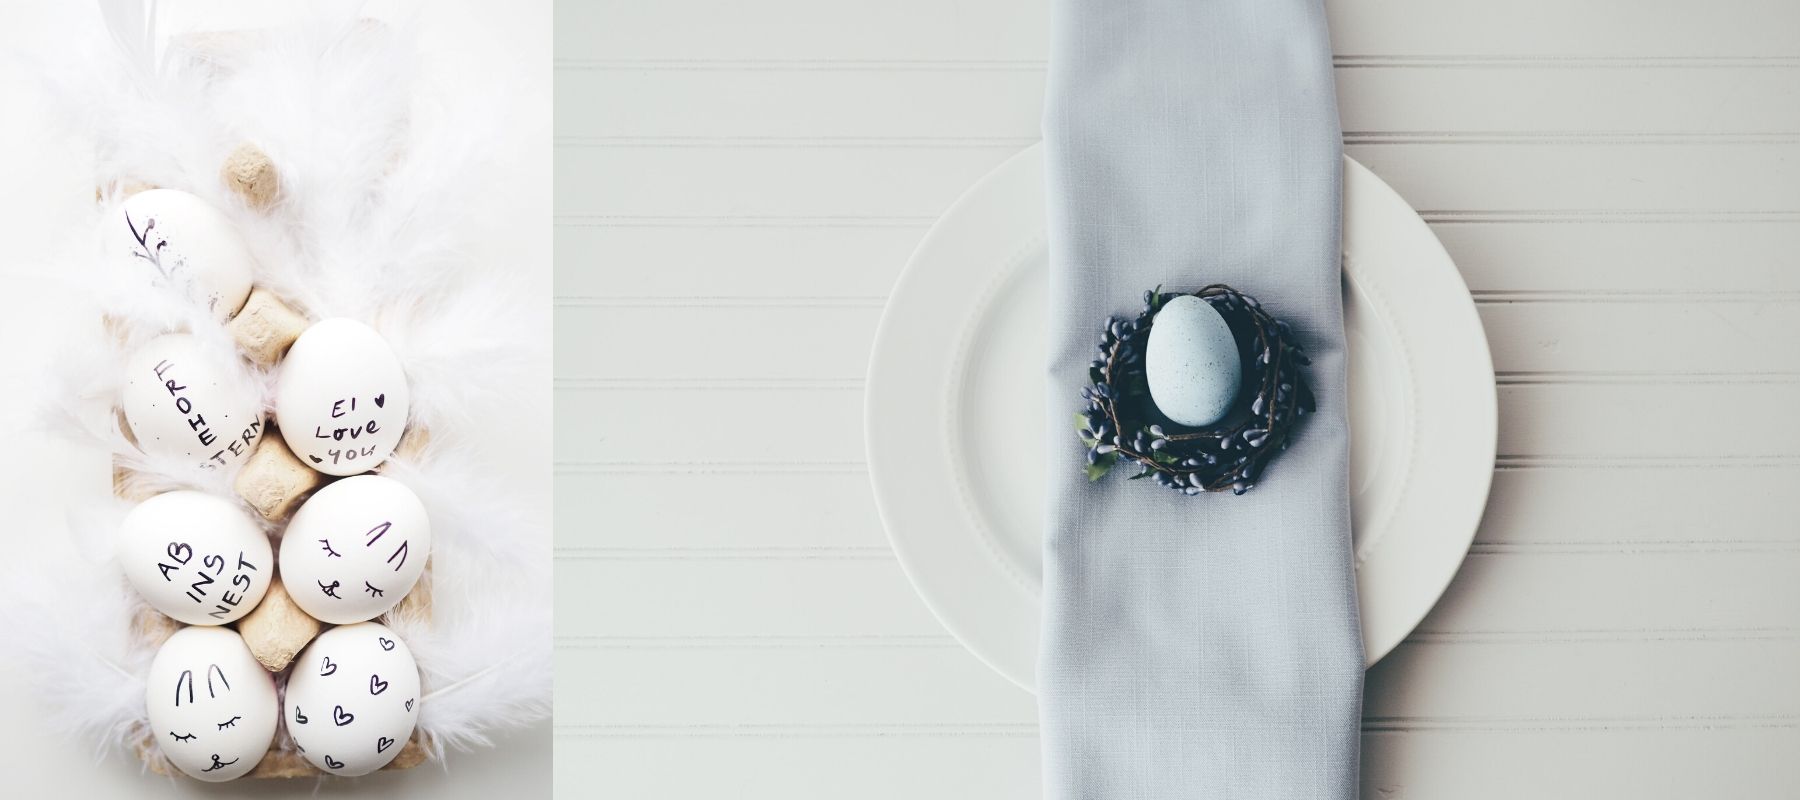 Grey napkin decorated with small white eggs